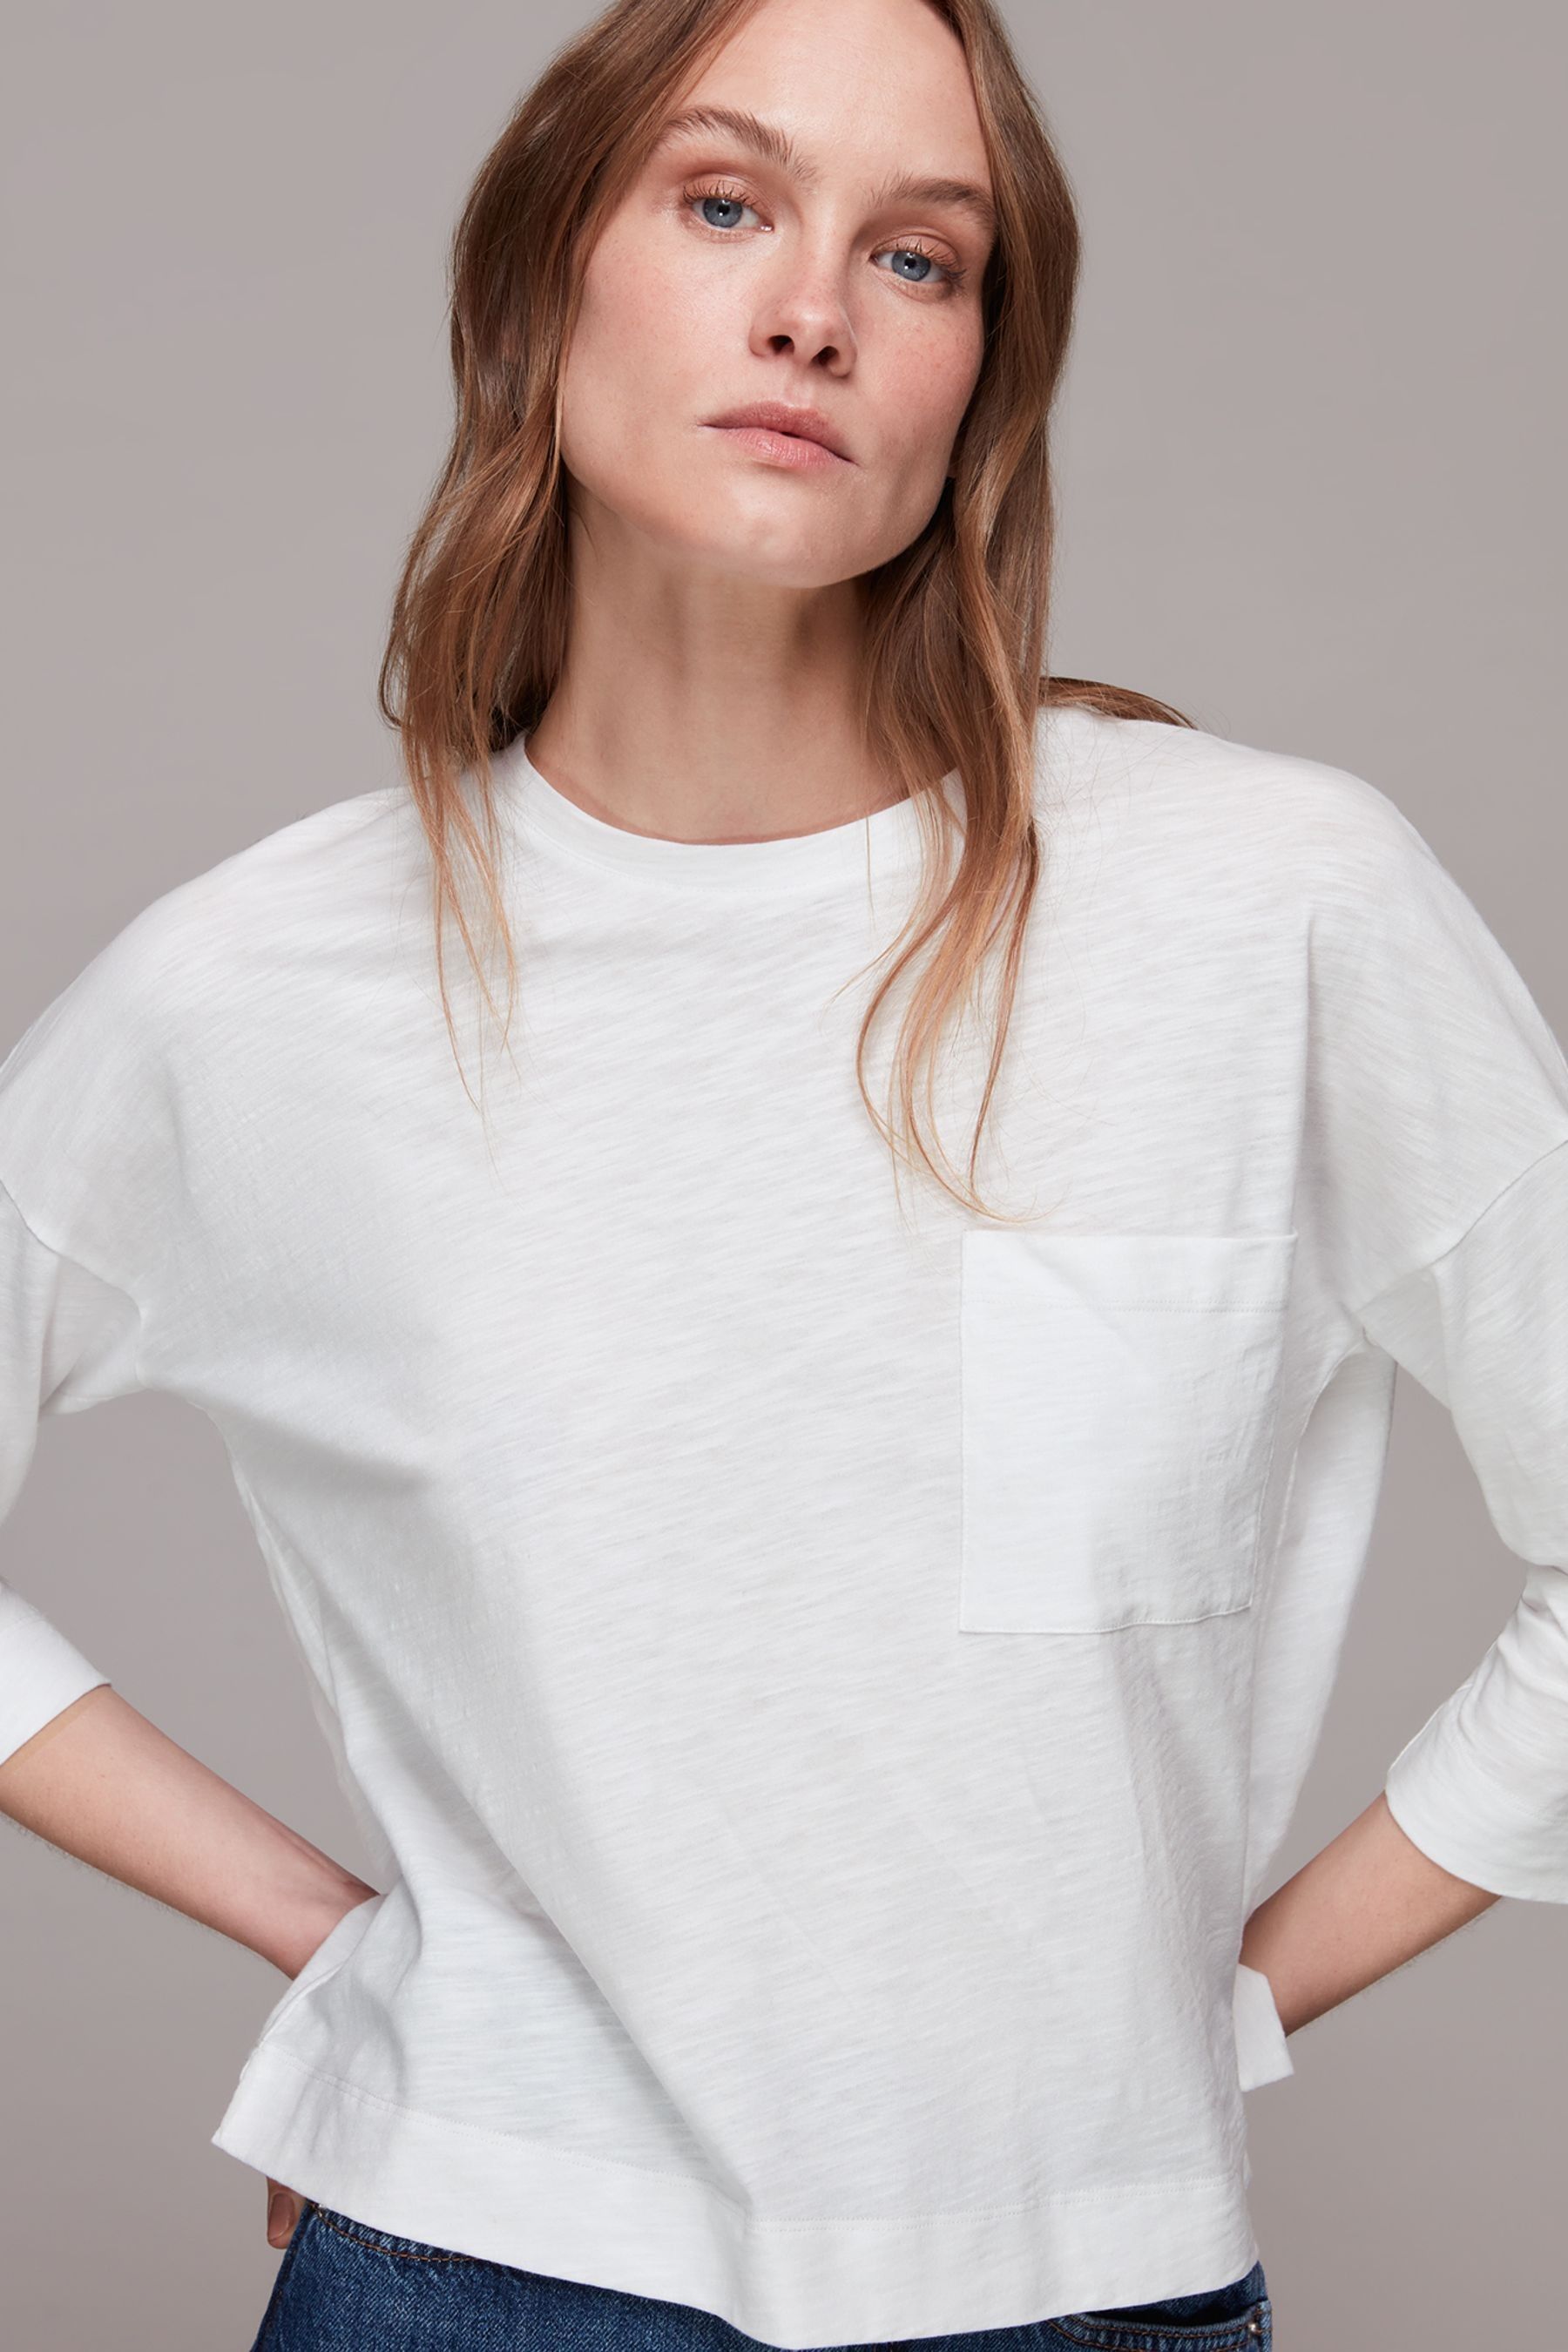 Buy Whistles Cotton Patch Pocket Top from the Next UK online shop